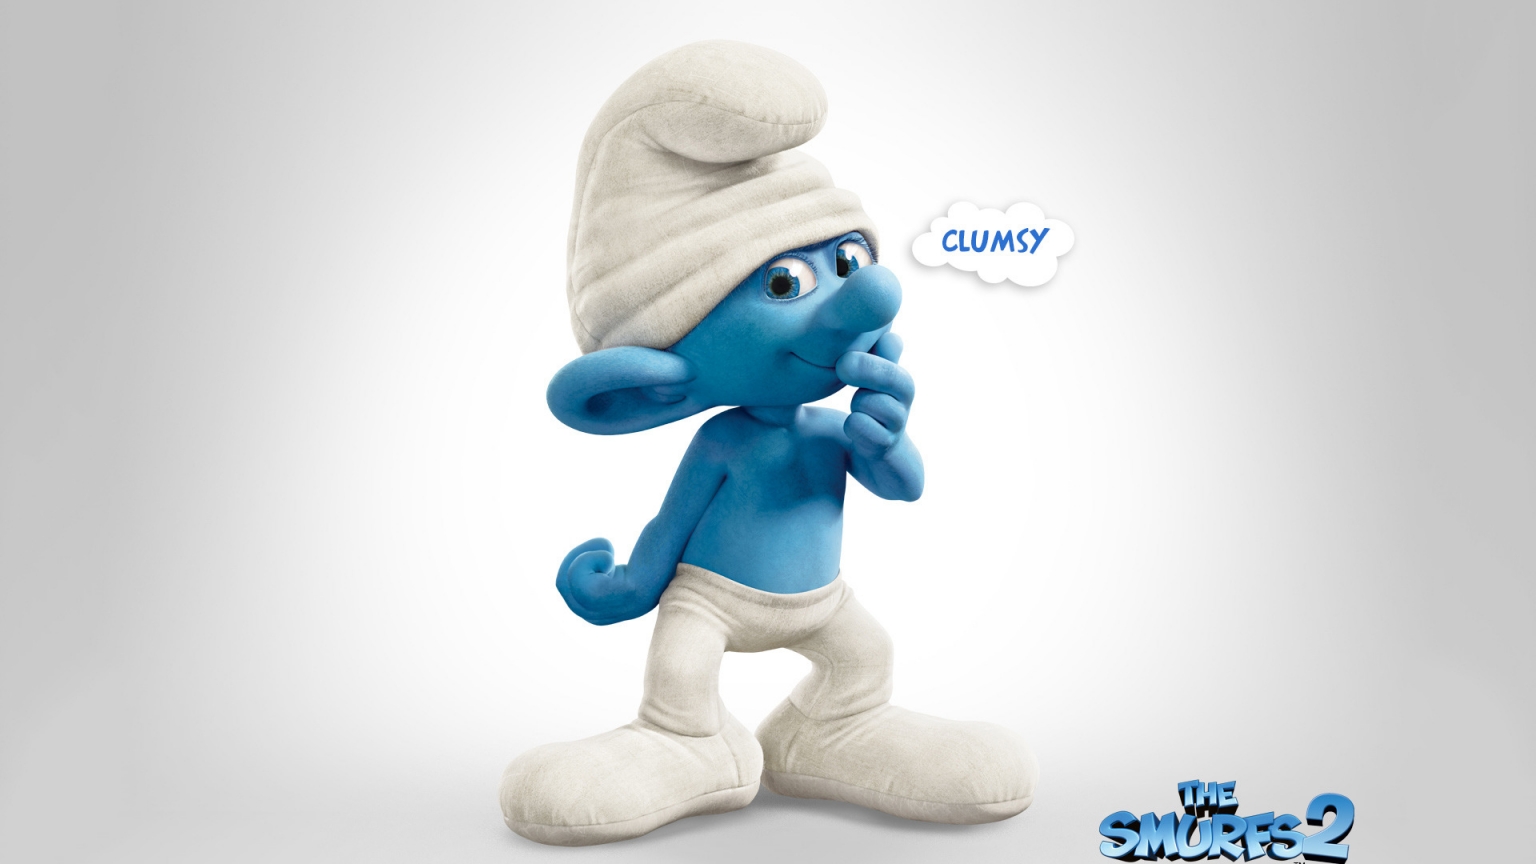 Clumsy The Smurfs 2 for 1536 x 864 HDTV resolution